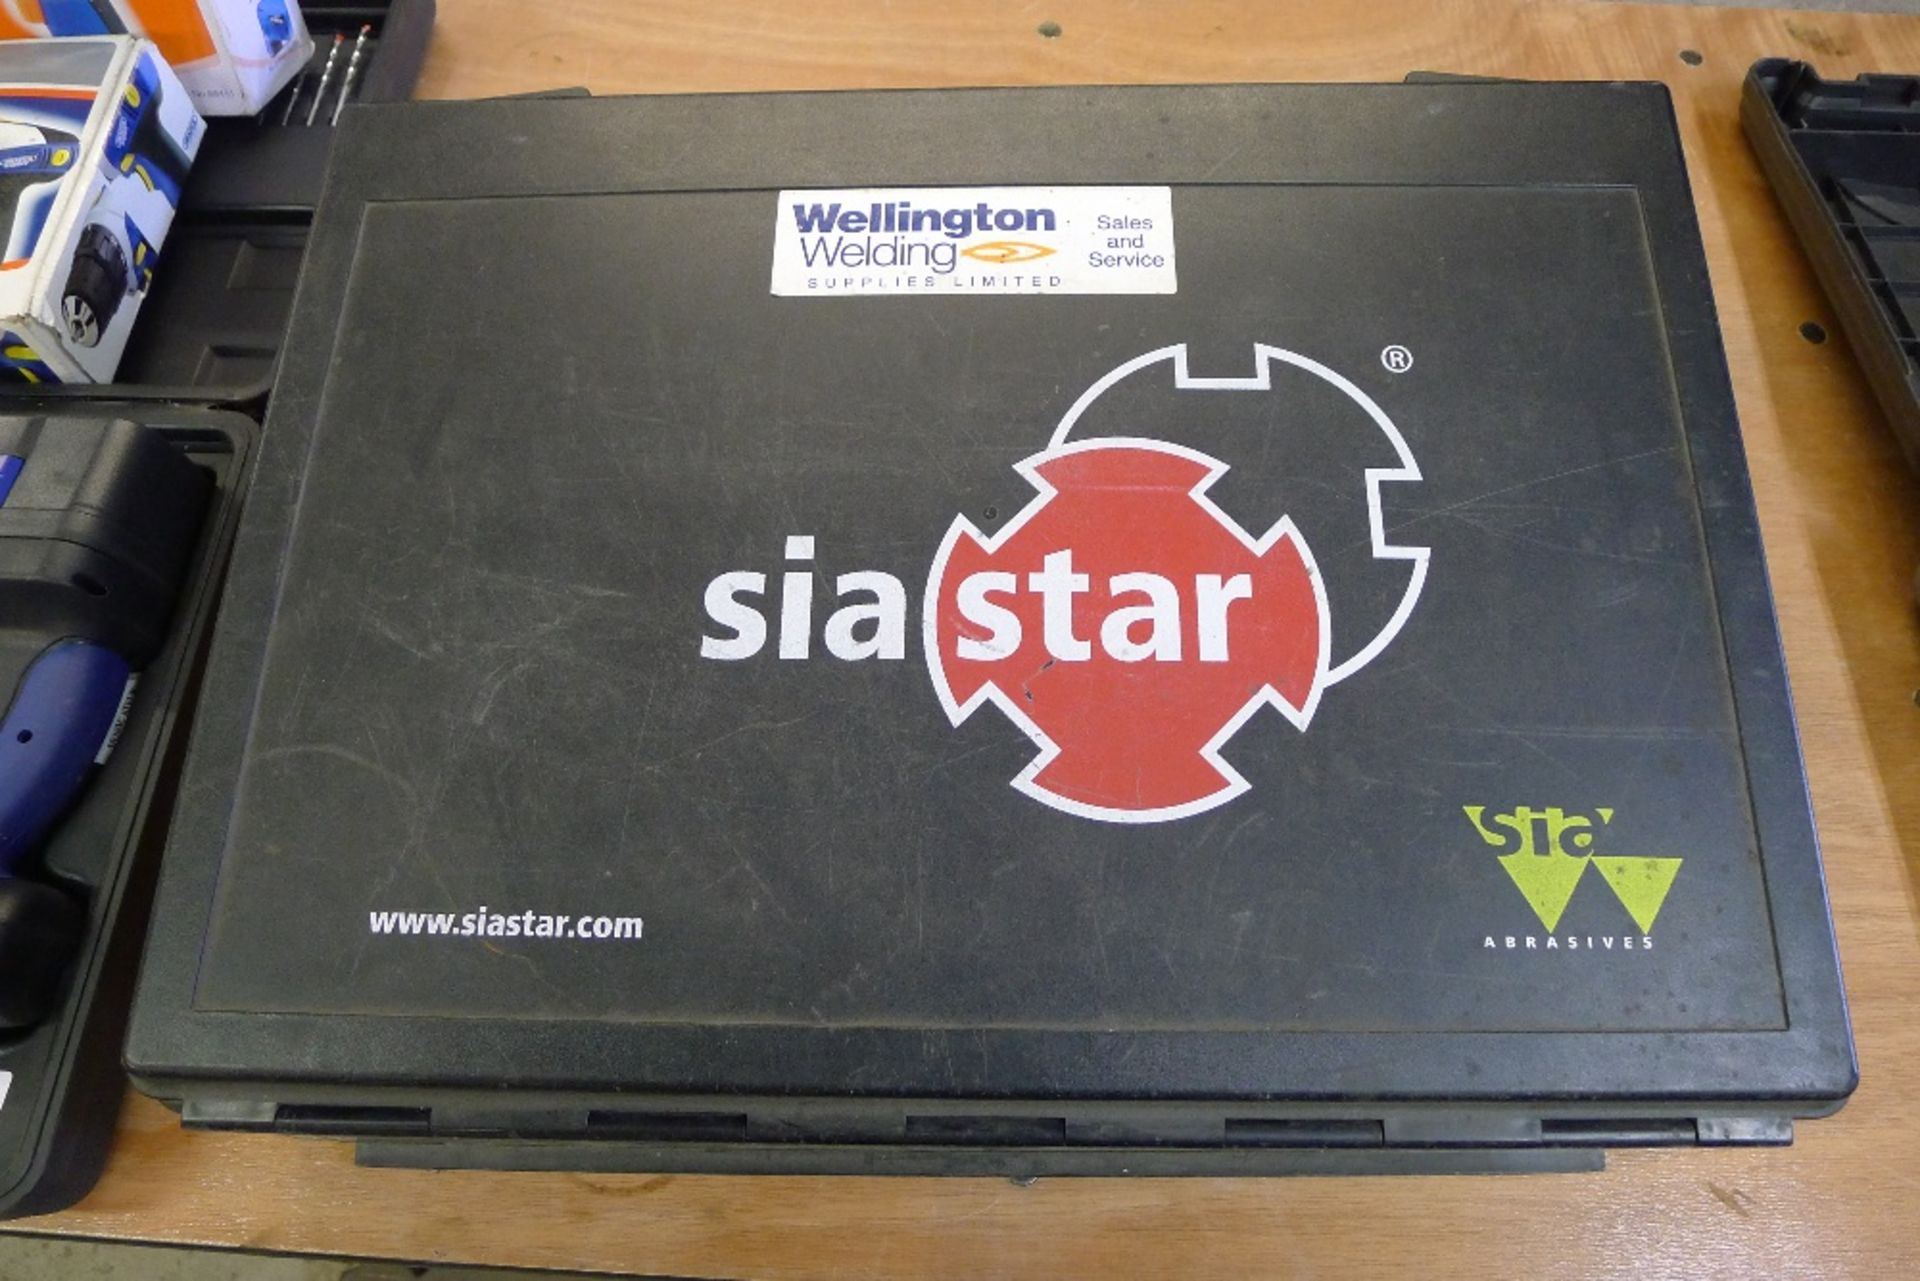 1 pre-weld cleaner / polisher by Siastar type UWG 8R, 110v supplied in plastic carry case with - Image 5 of 5